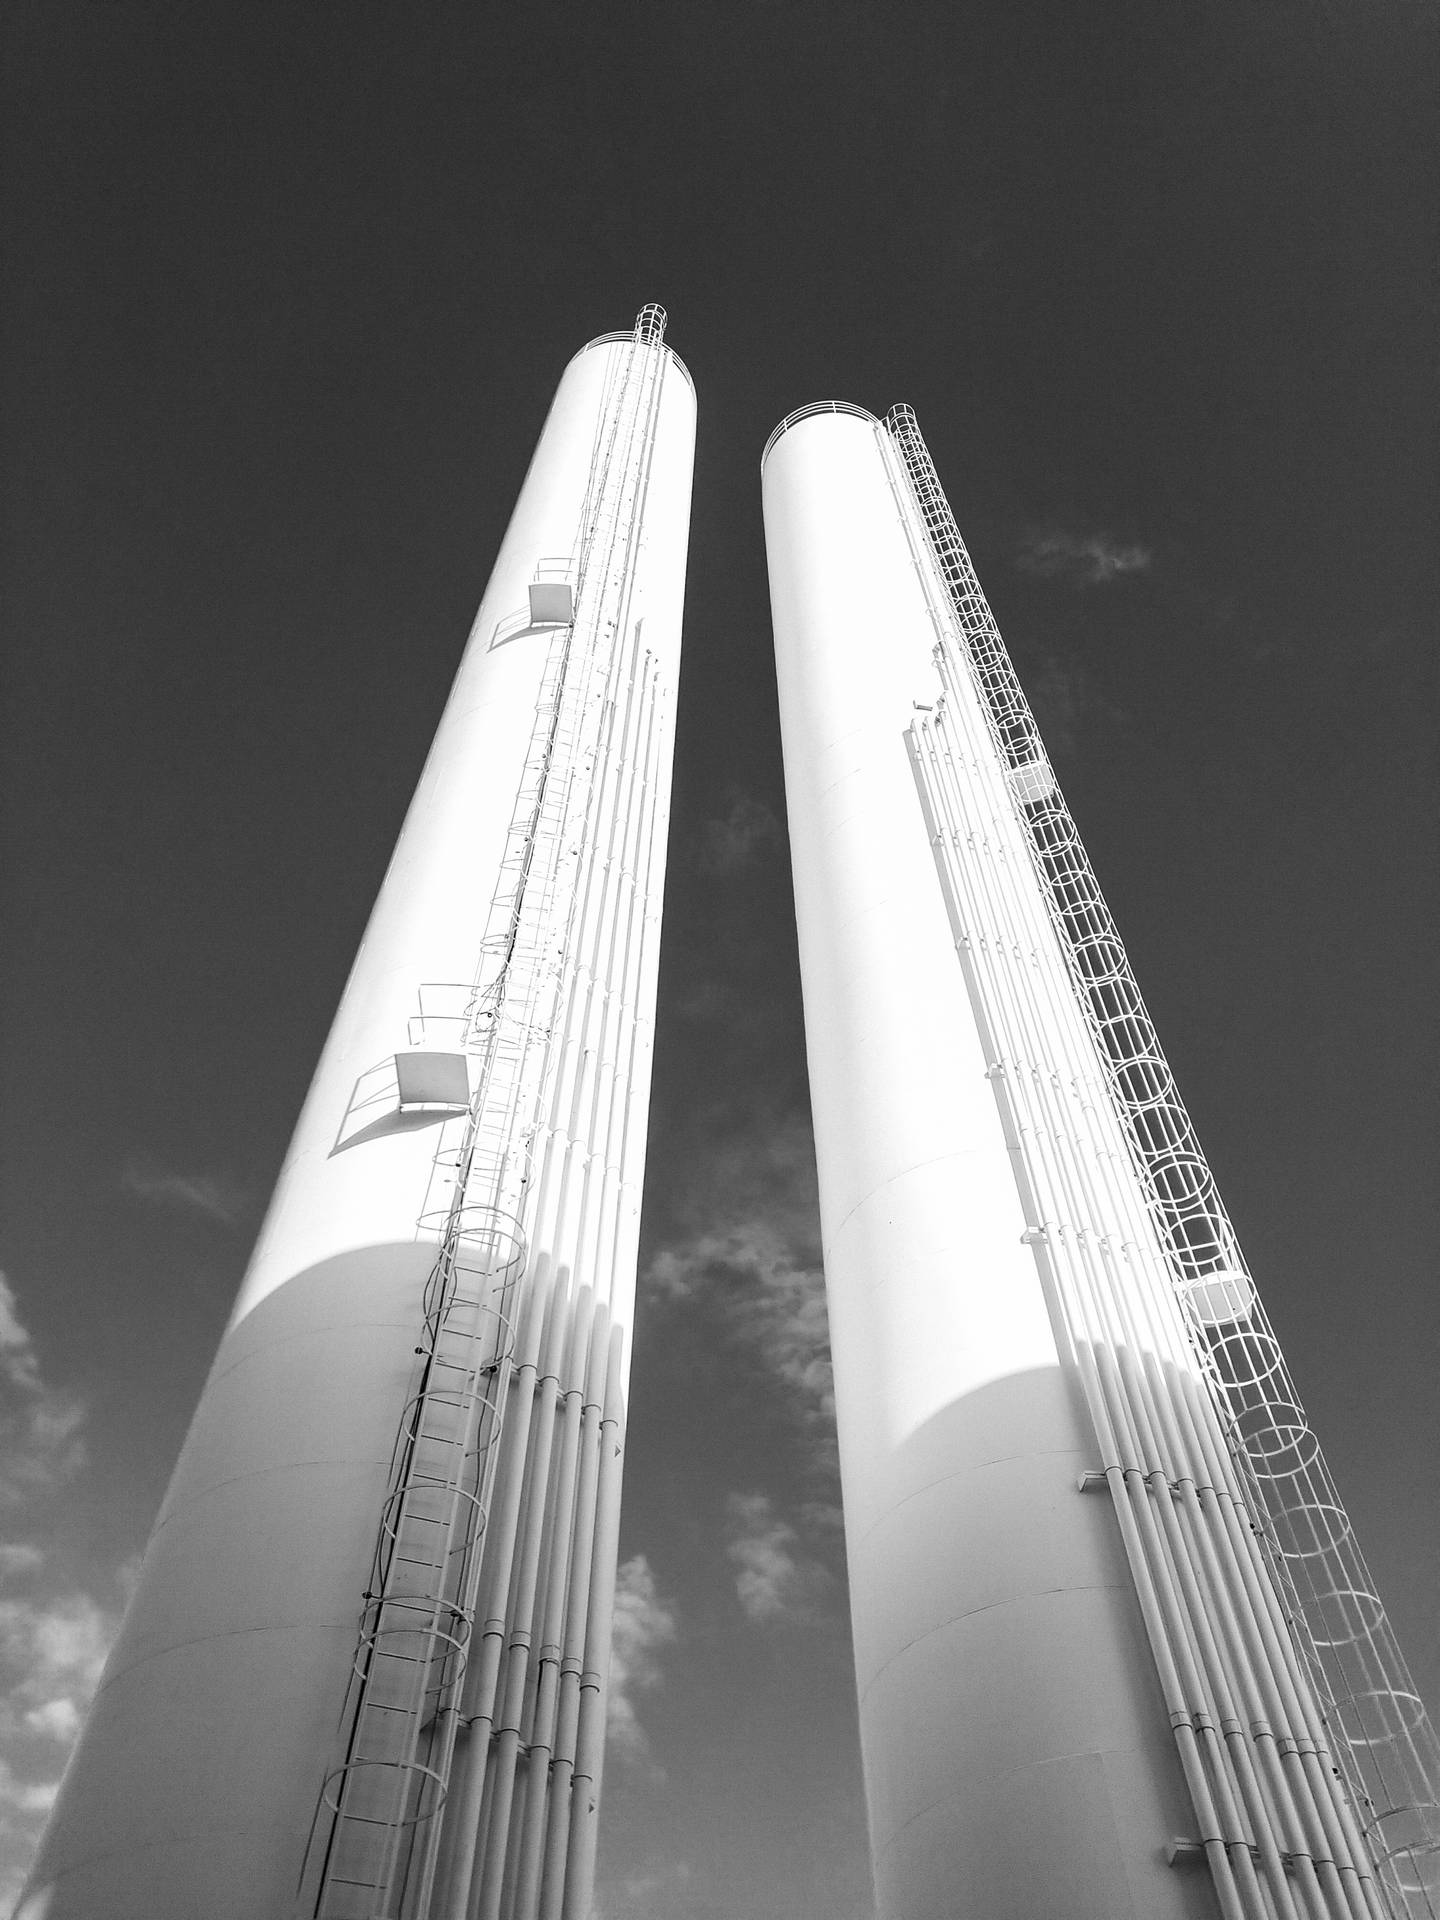 Tall Tower Tanks In Rio Background